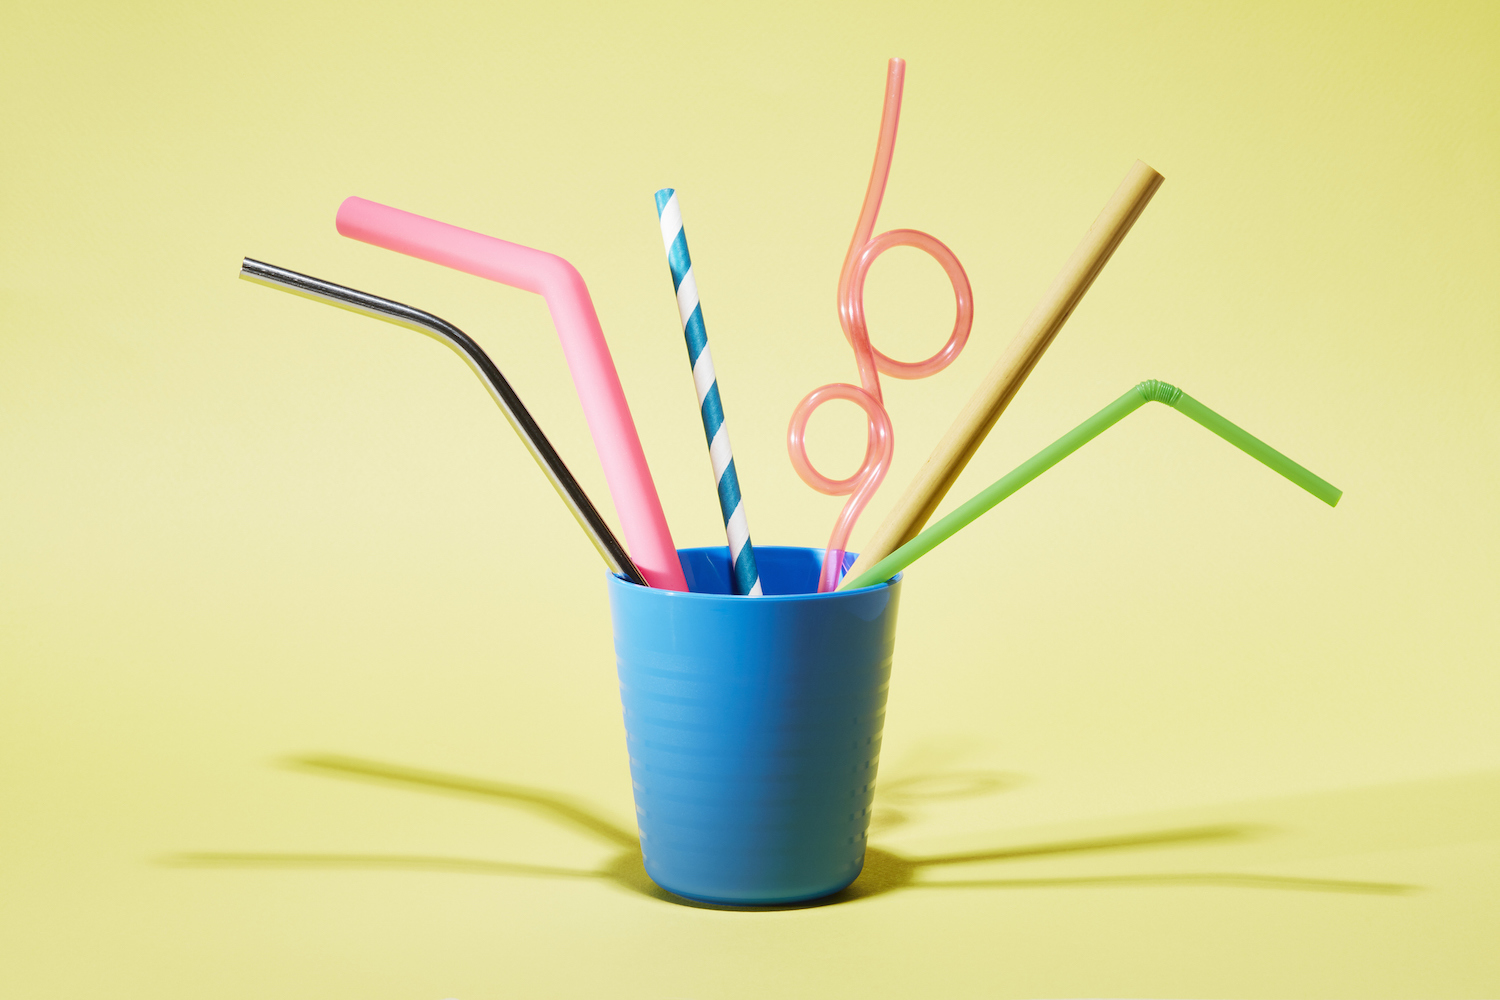 Six different drinking straws in a cup